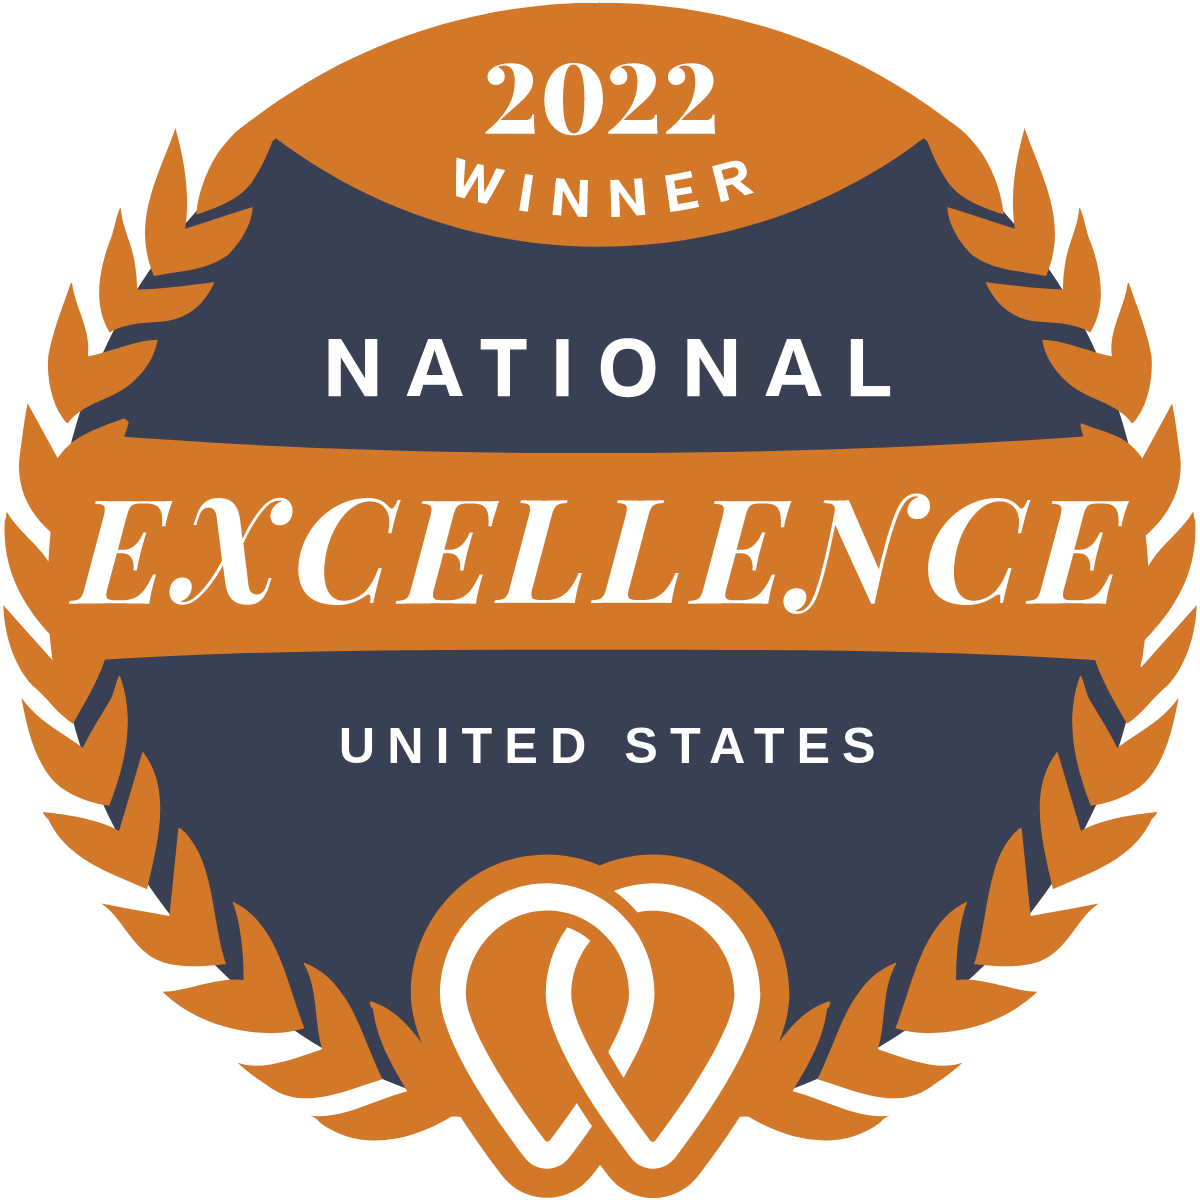 a National Excellence badge for the United States category